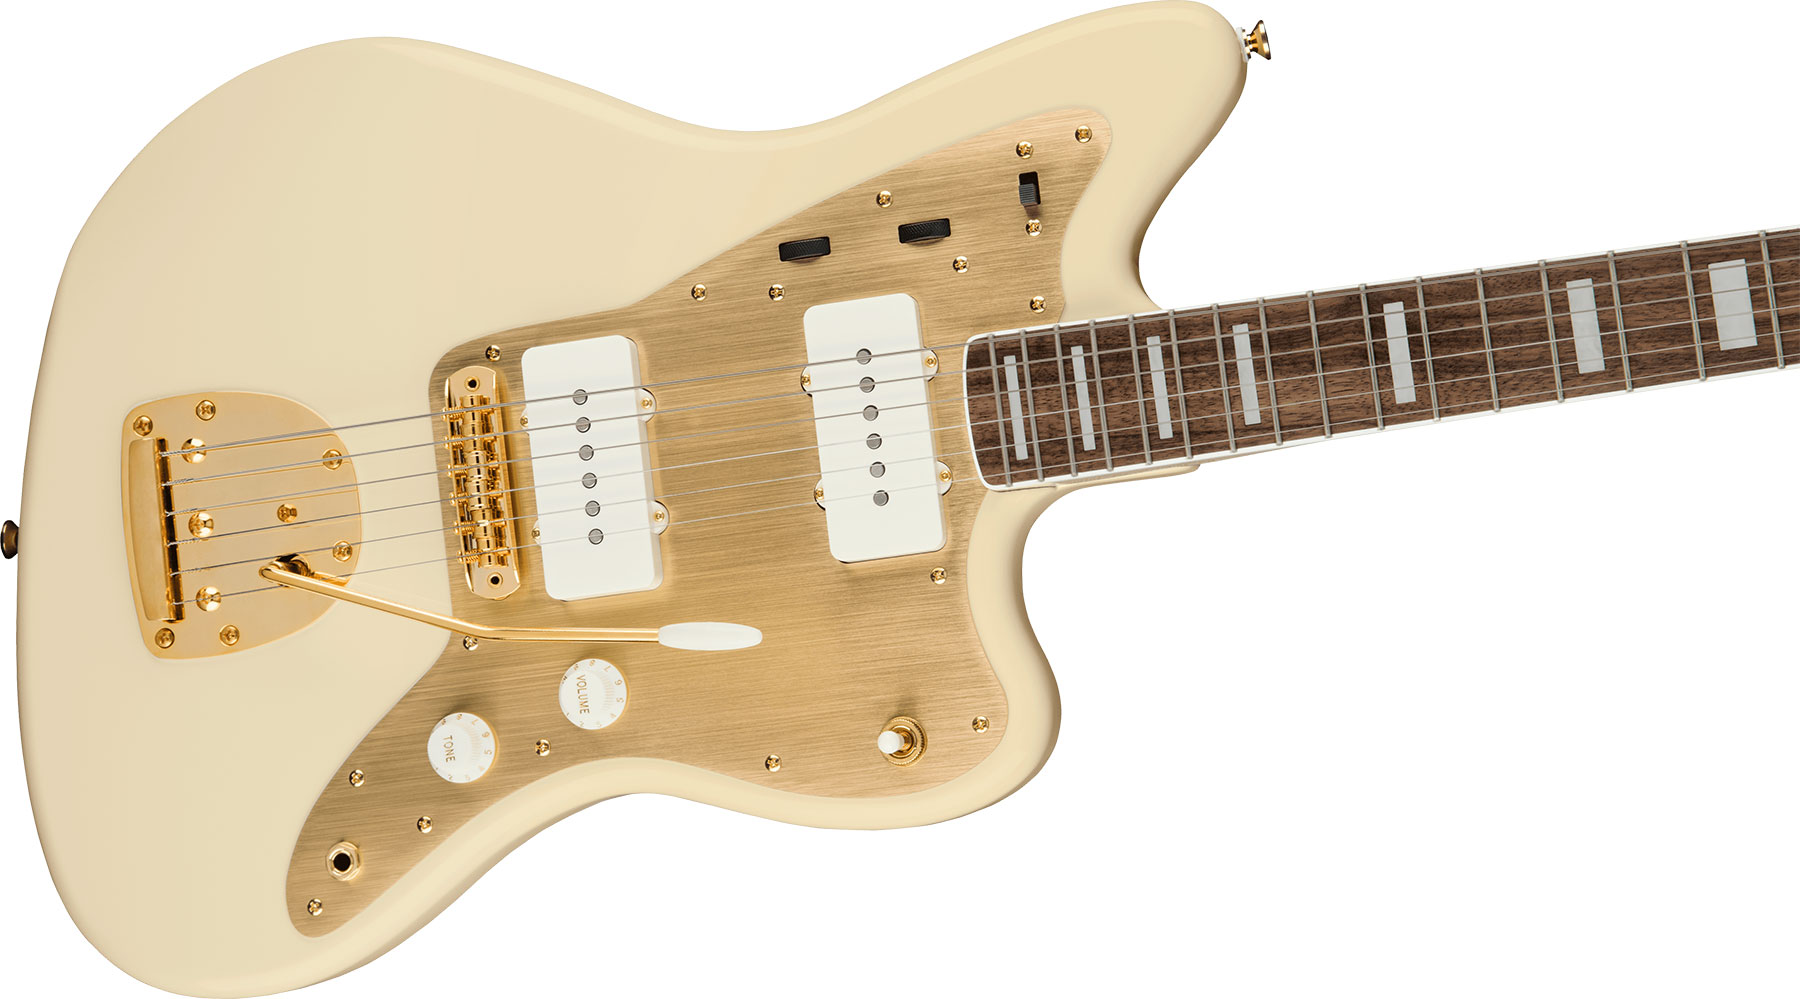 Squier Jazzmaster 40th Anniversary Gold Edition Lau - Olympic White - Guitarra electrica retro rock - Variation 2